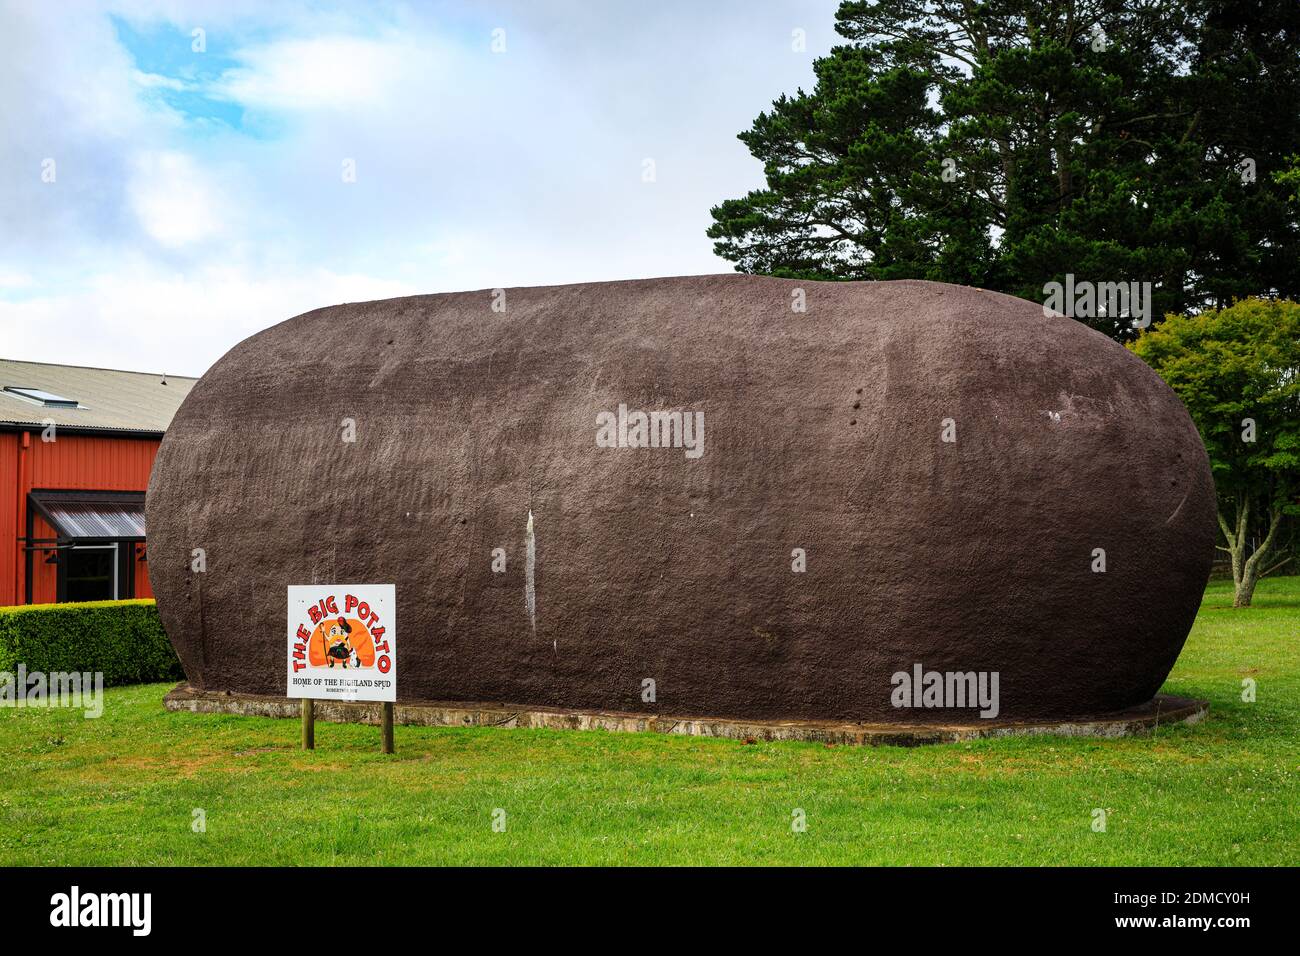 Built in 1977 by local potato grower, Jim Mauger, the Big Potato, located right in the heart of Robertson on the Illawarra Highway, Stock Photo